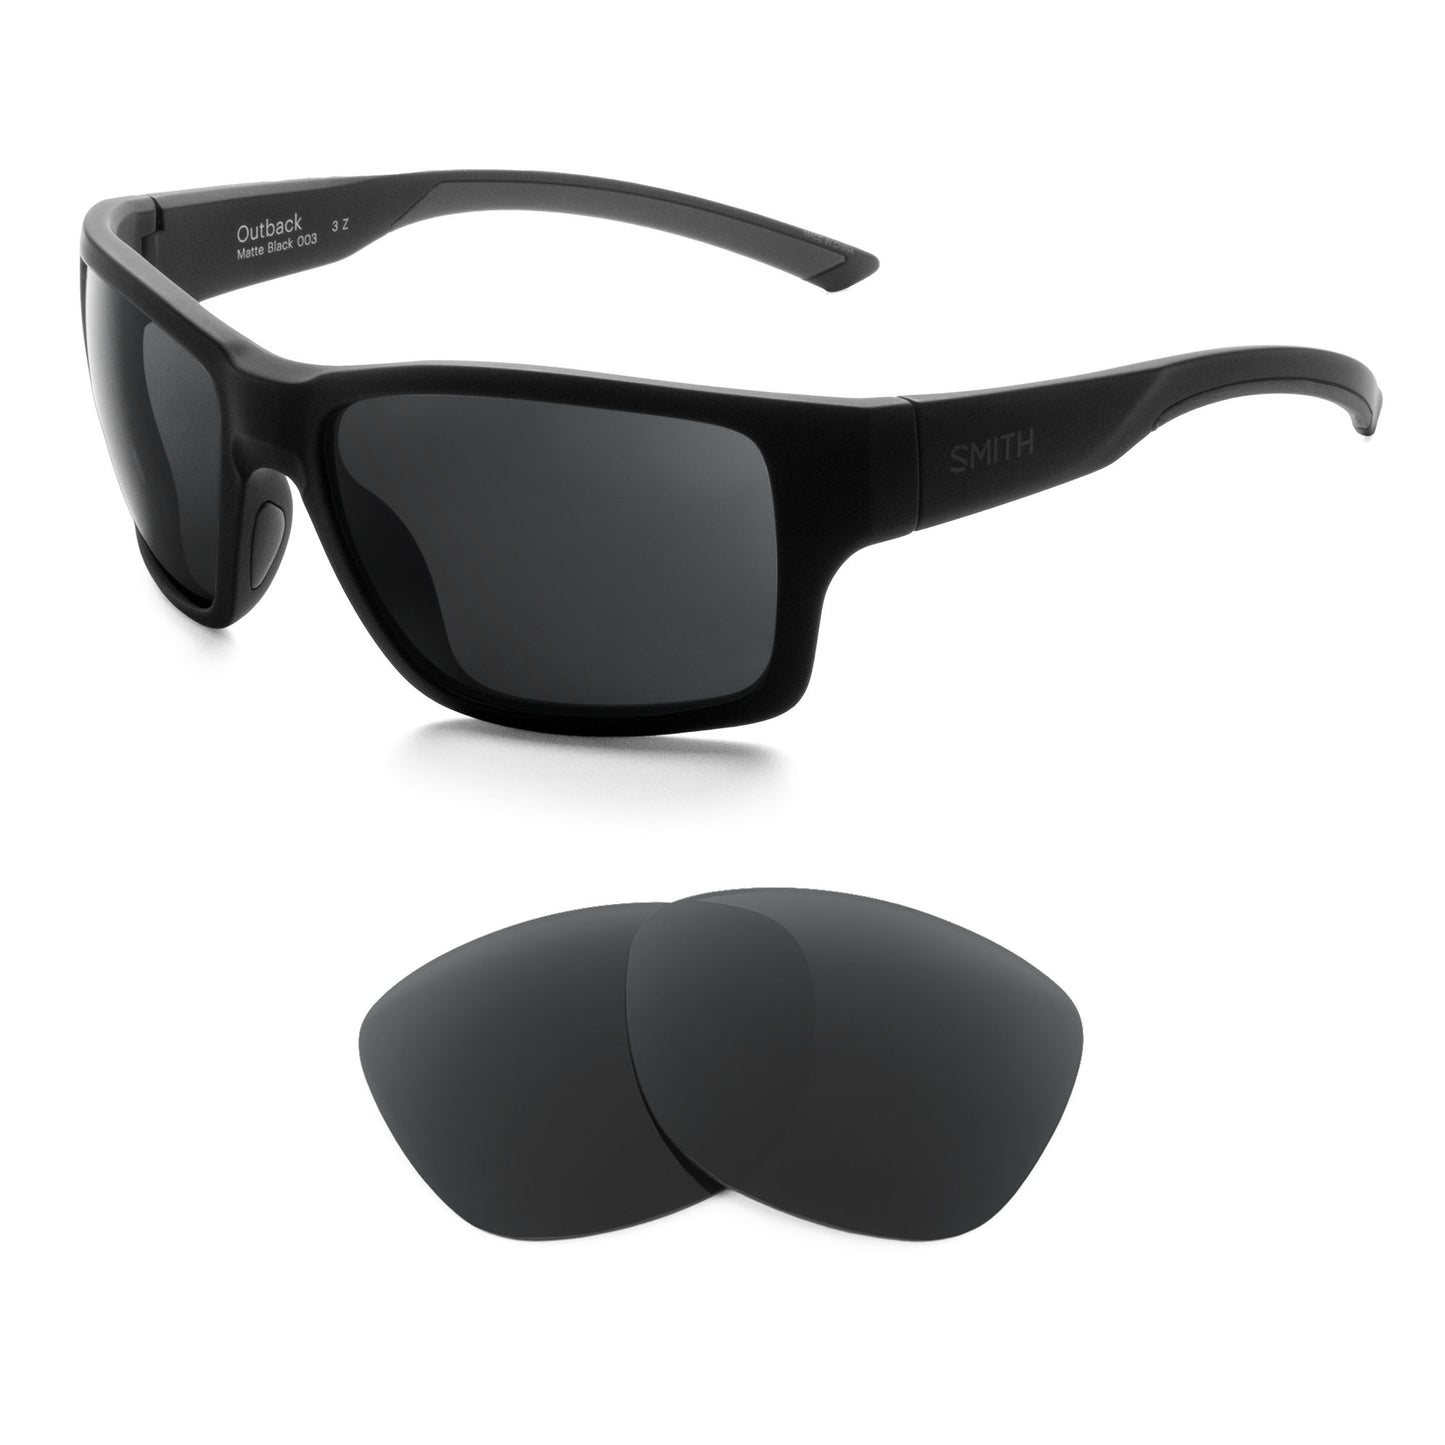 Smith Outback sunglasses with replacement lenses